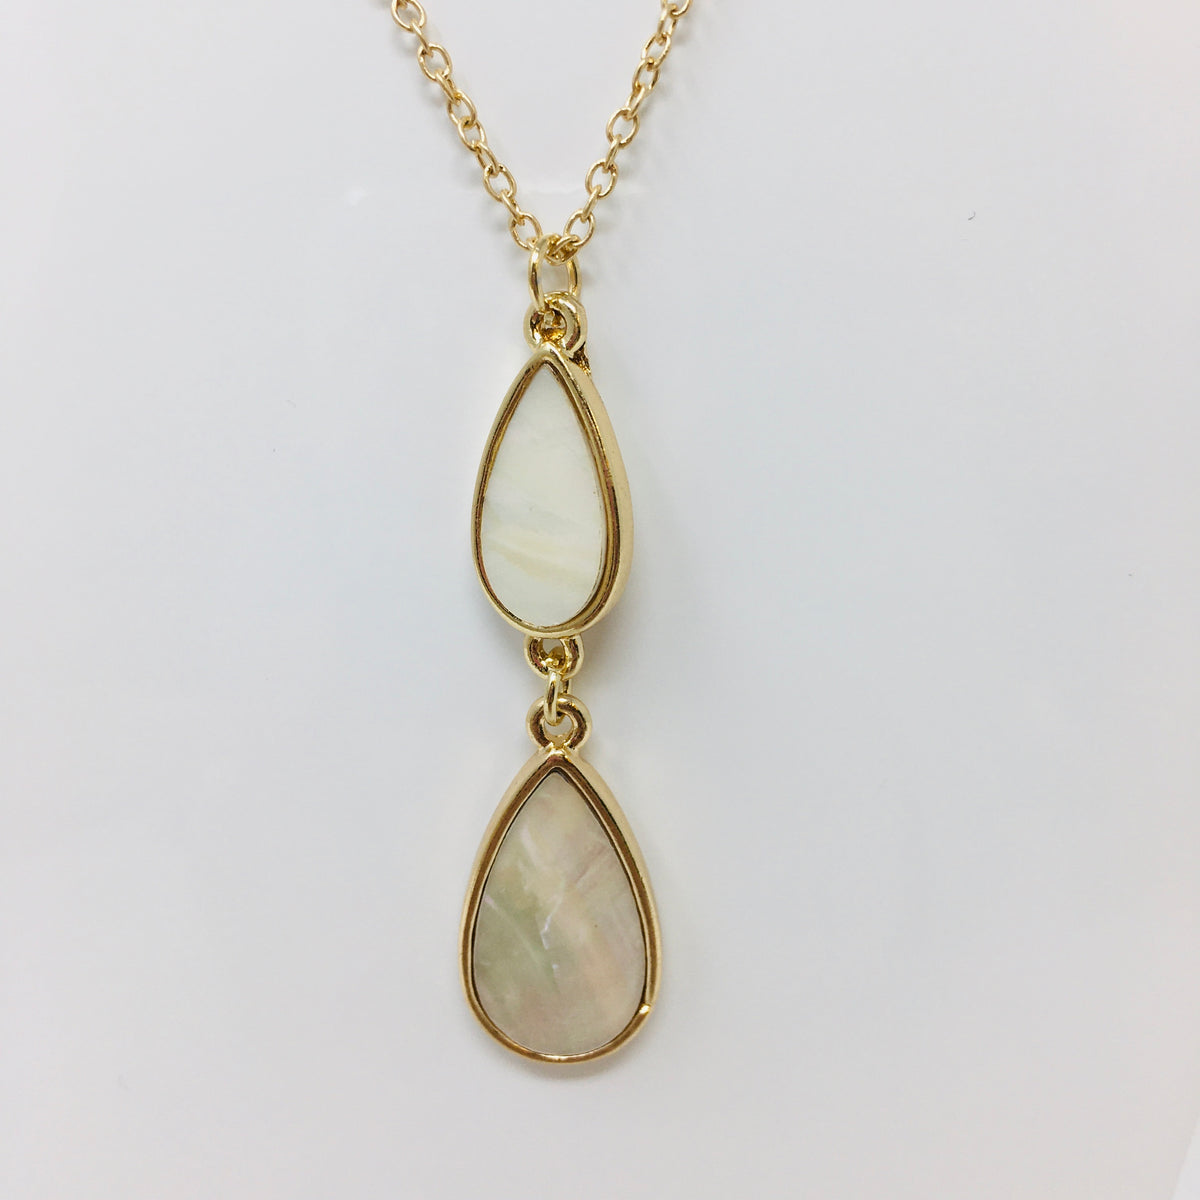 close up view of double teardrop pendant with mother of pearl inserts in the teardrops shown on white background